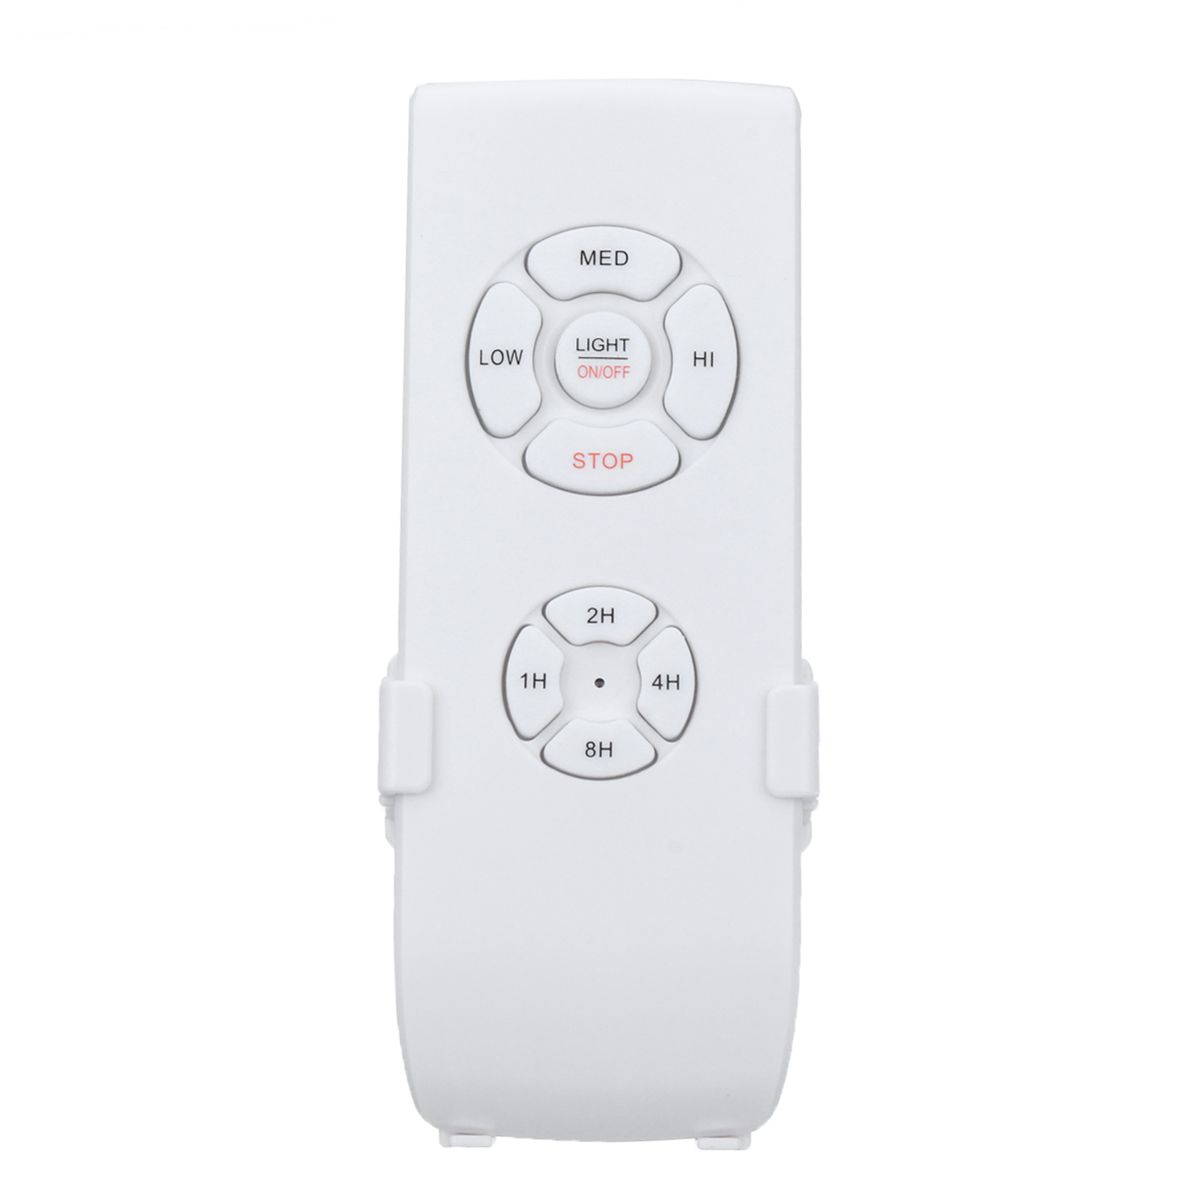 Universal-Timing-Wireless-Remote-Control-Light-Switches-for-Ceiling-Fan-Lamp-AC220-240V-1279213